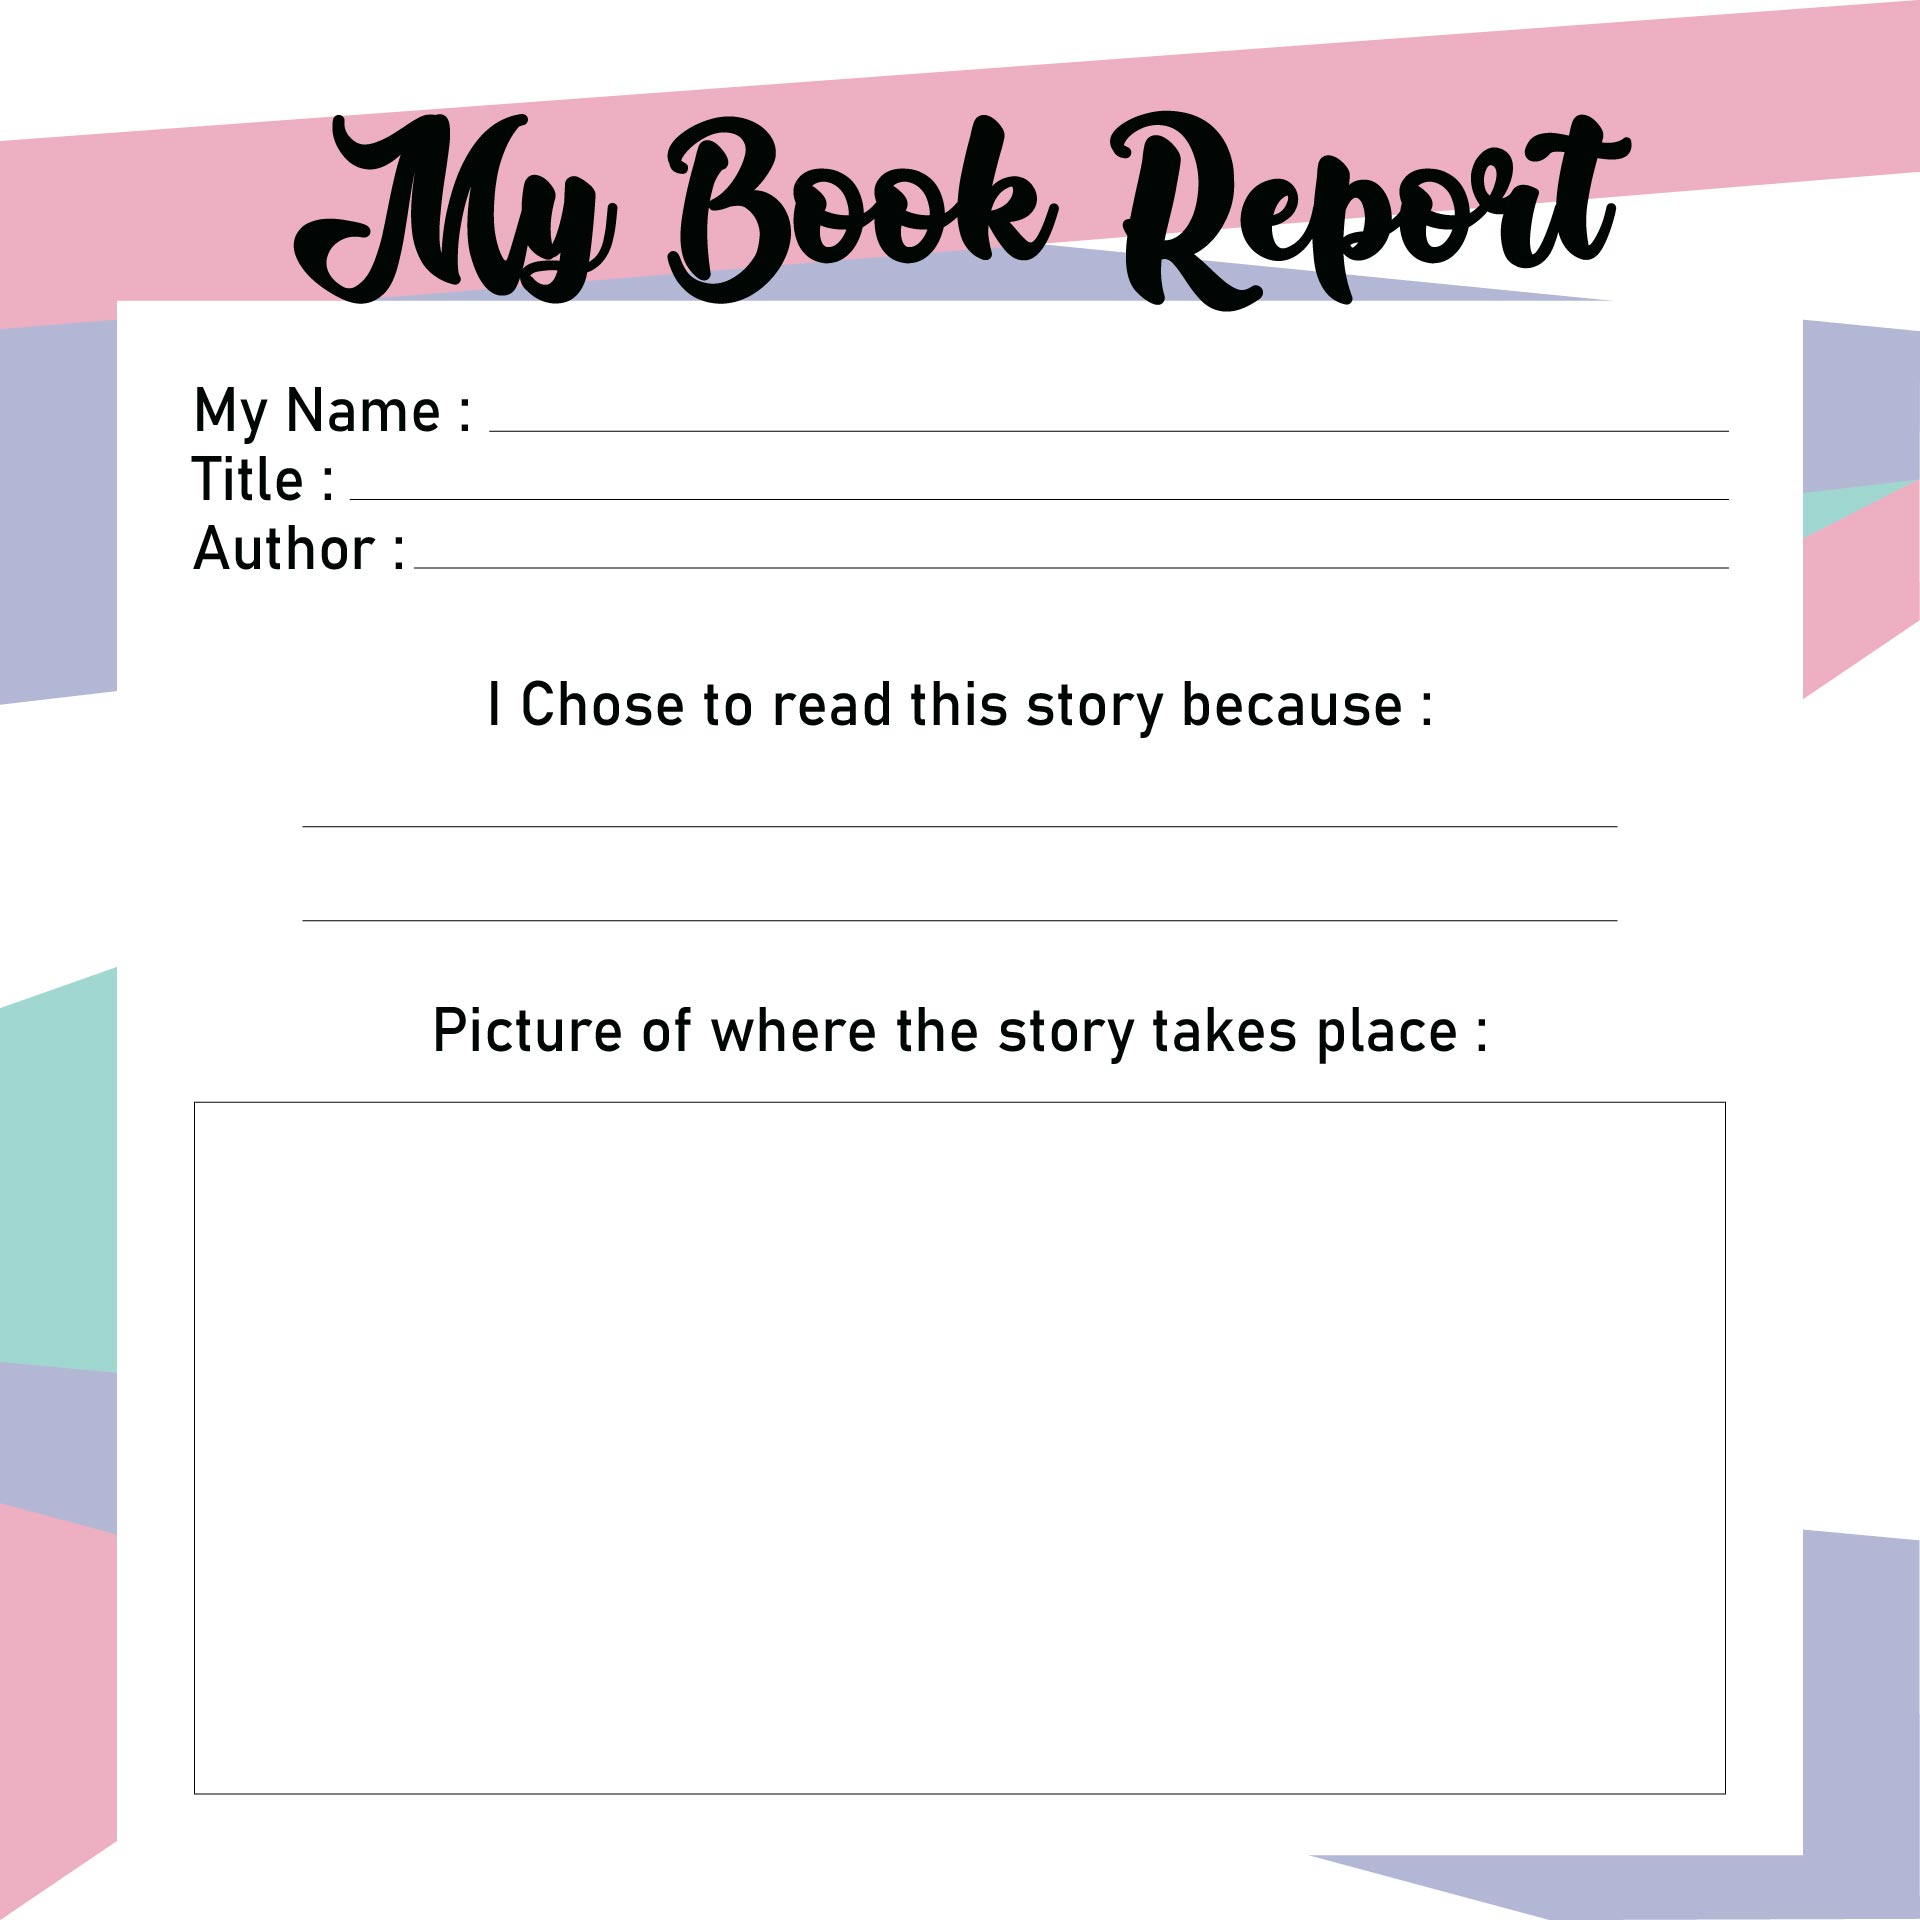 free printable book report forms for elementary students